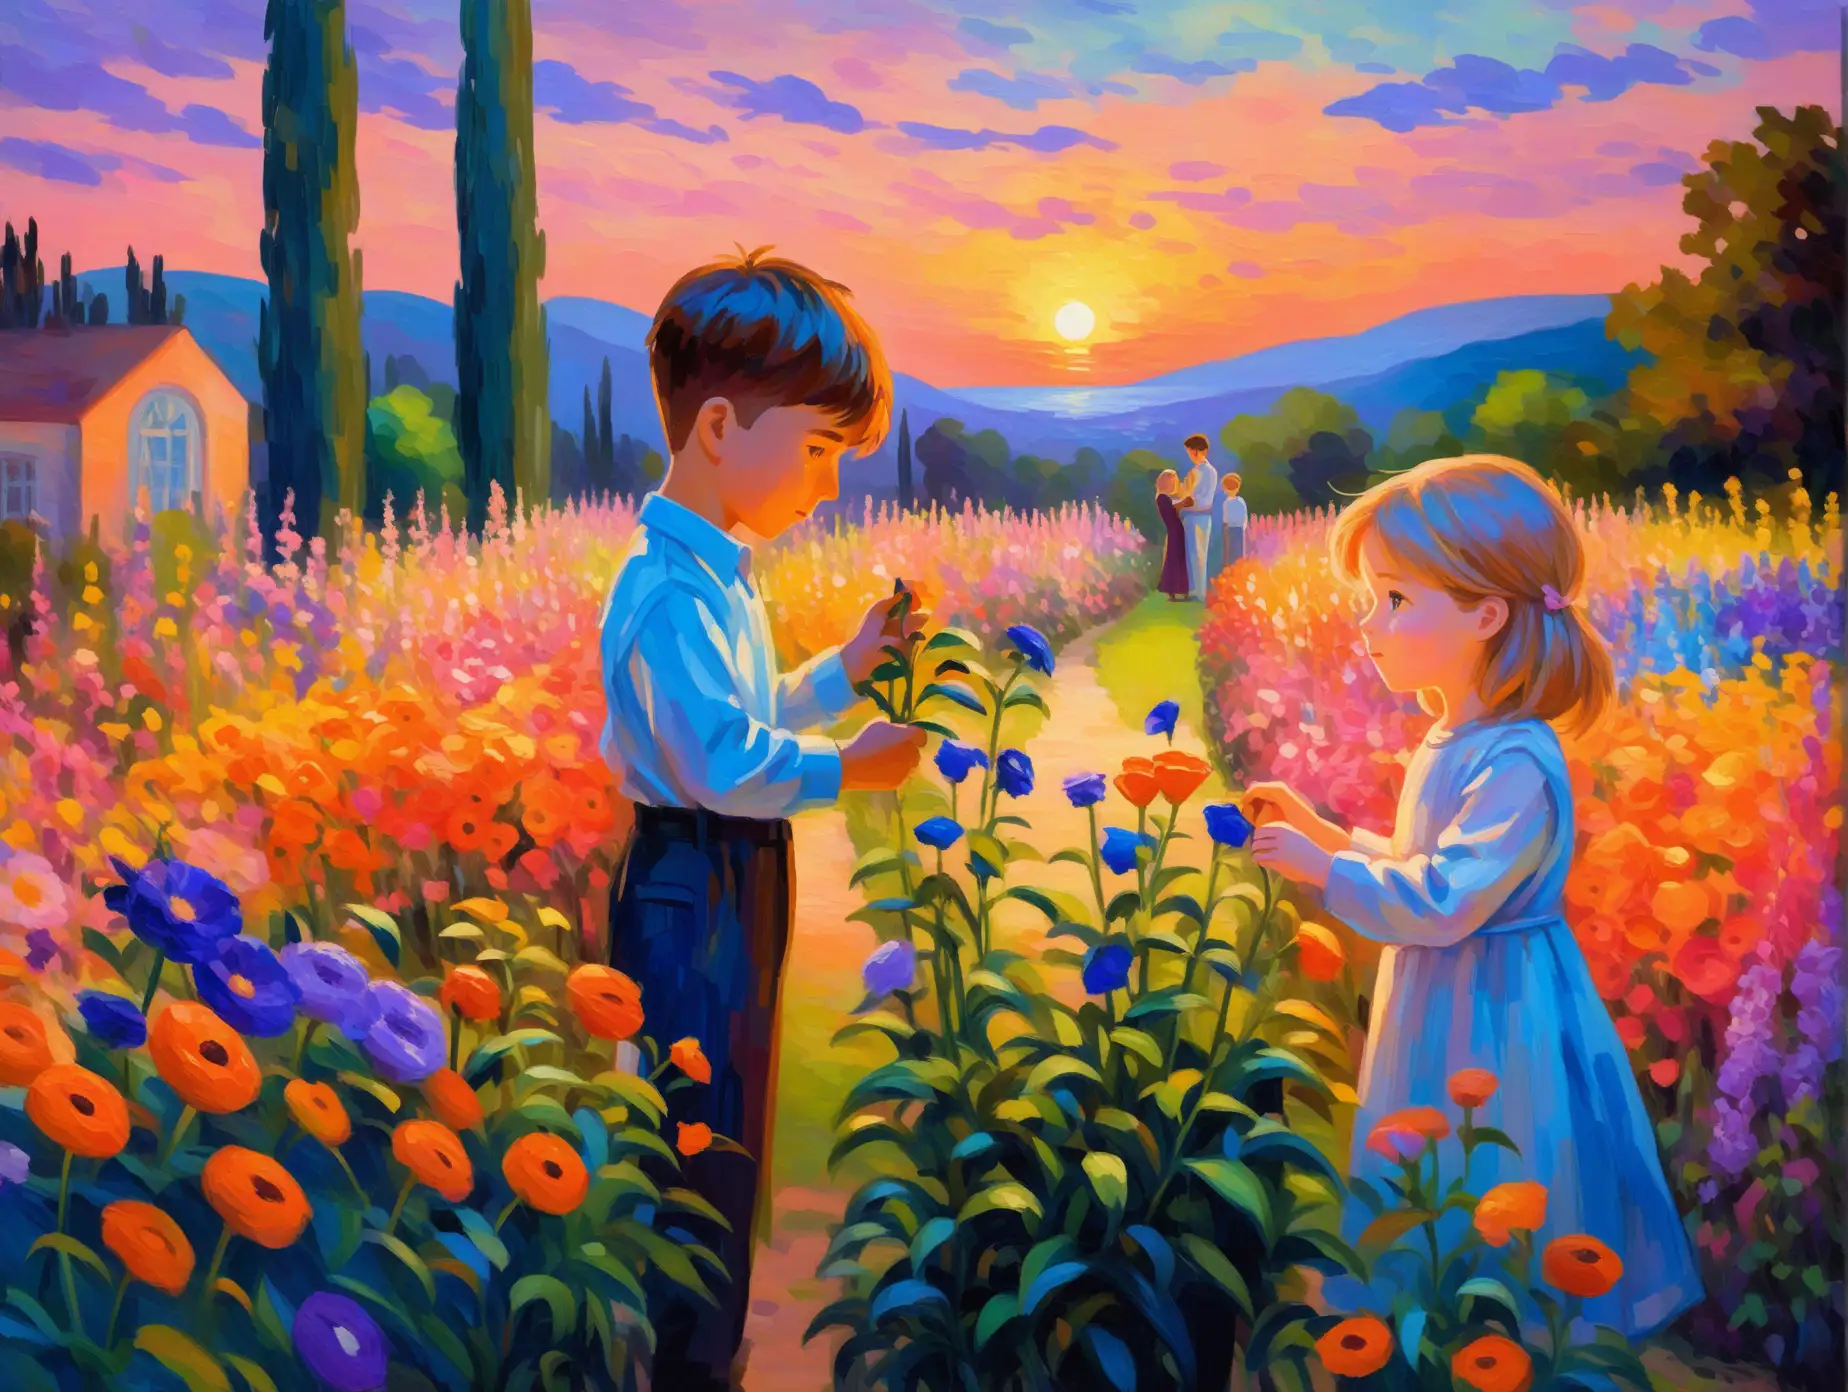 Young Boy and Girl Admiring FourOClock Flower in Colorful Garden at Sunset